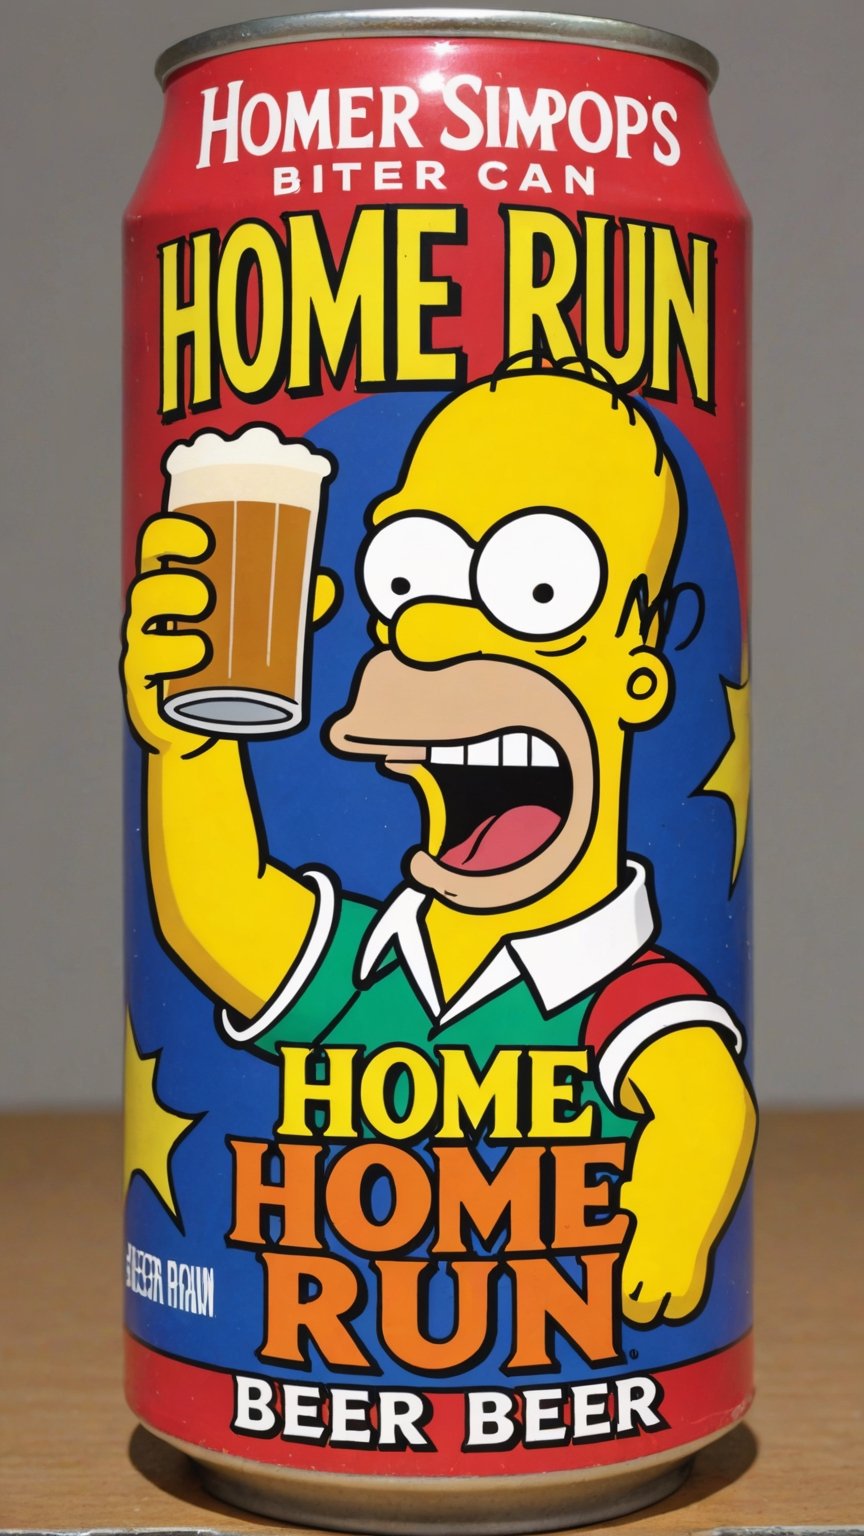 photo of Homer Simpson as Joker in beer can with text that says "home run beer"